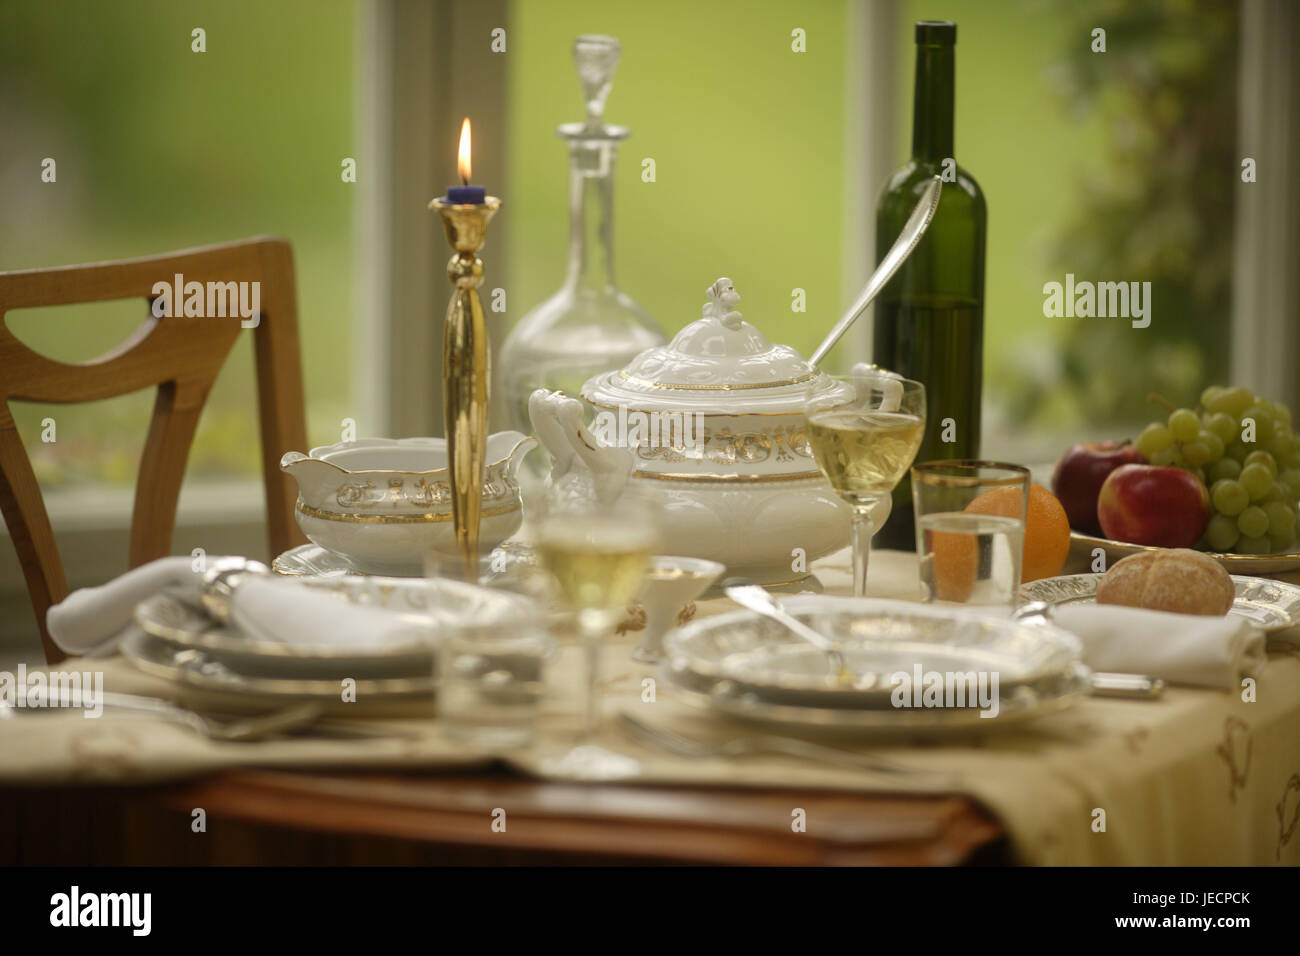 Table, covered, porcelain, elegantly, dishes, china, covers, plates, sauceboat, soup tureen, tureen, wine, wine flask, wineglasses, glasses, decanter, water, fruit plate, fruit, grapes, apples, orange, brass candlestick, skyer, candle-light, festively, flatware, chair, window, nobody, Stock Photo